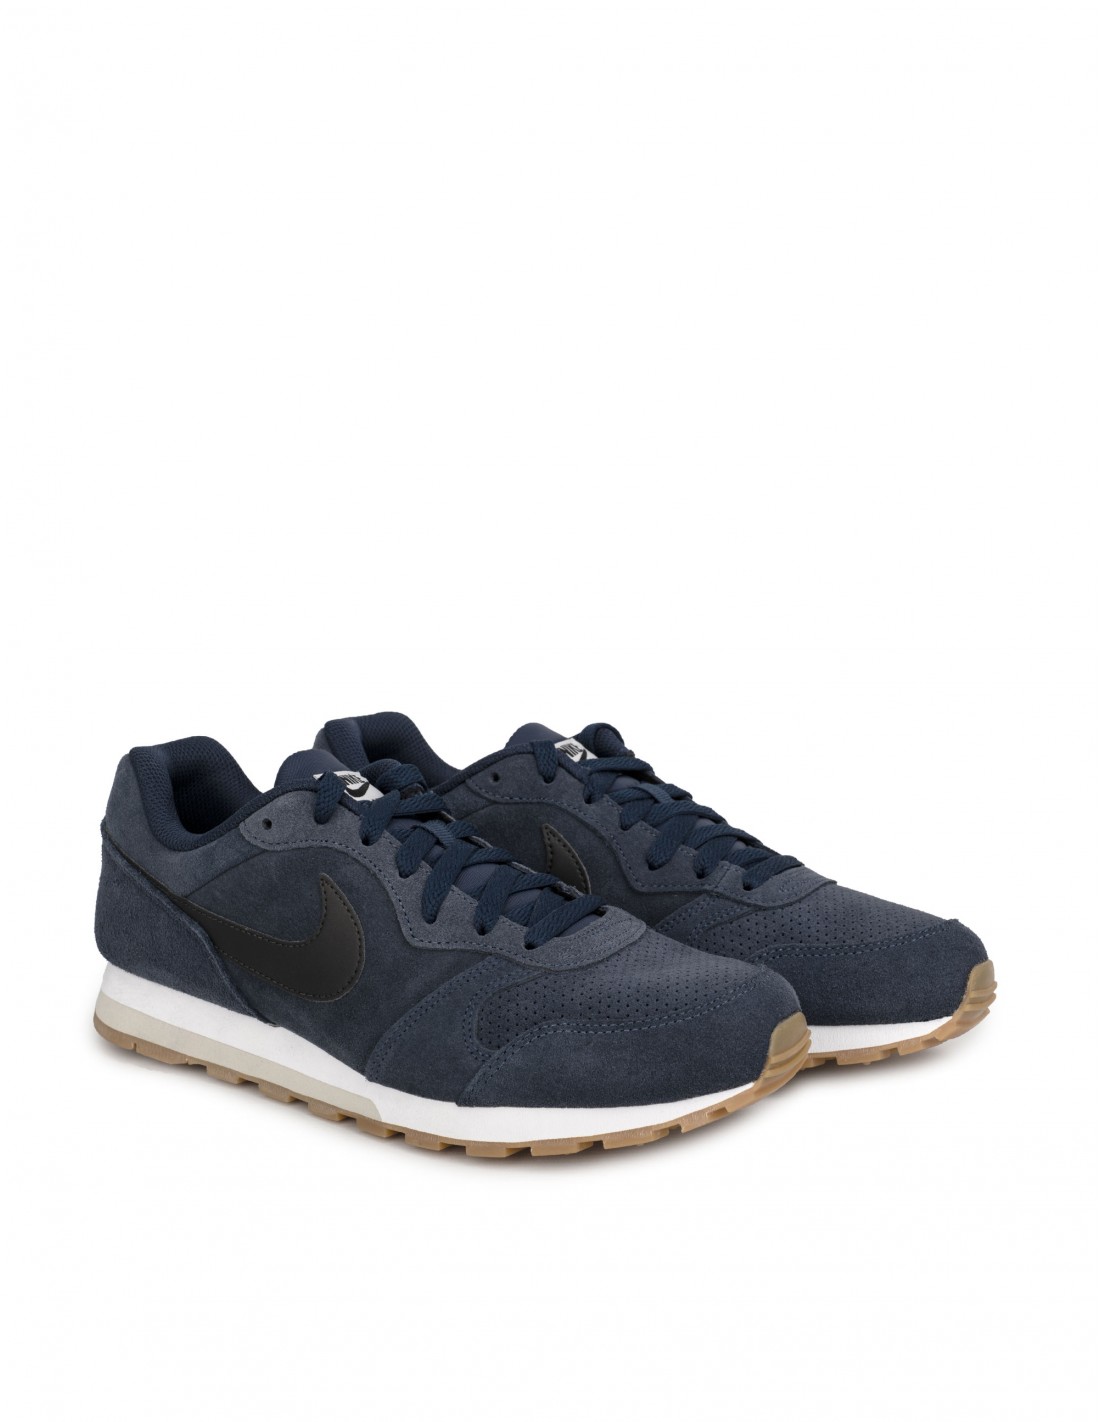 NIKE MD Suede Hombre - LIMONERA